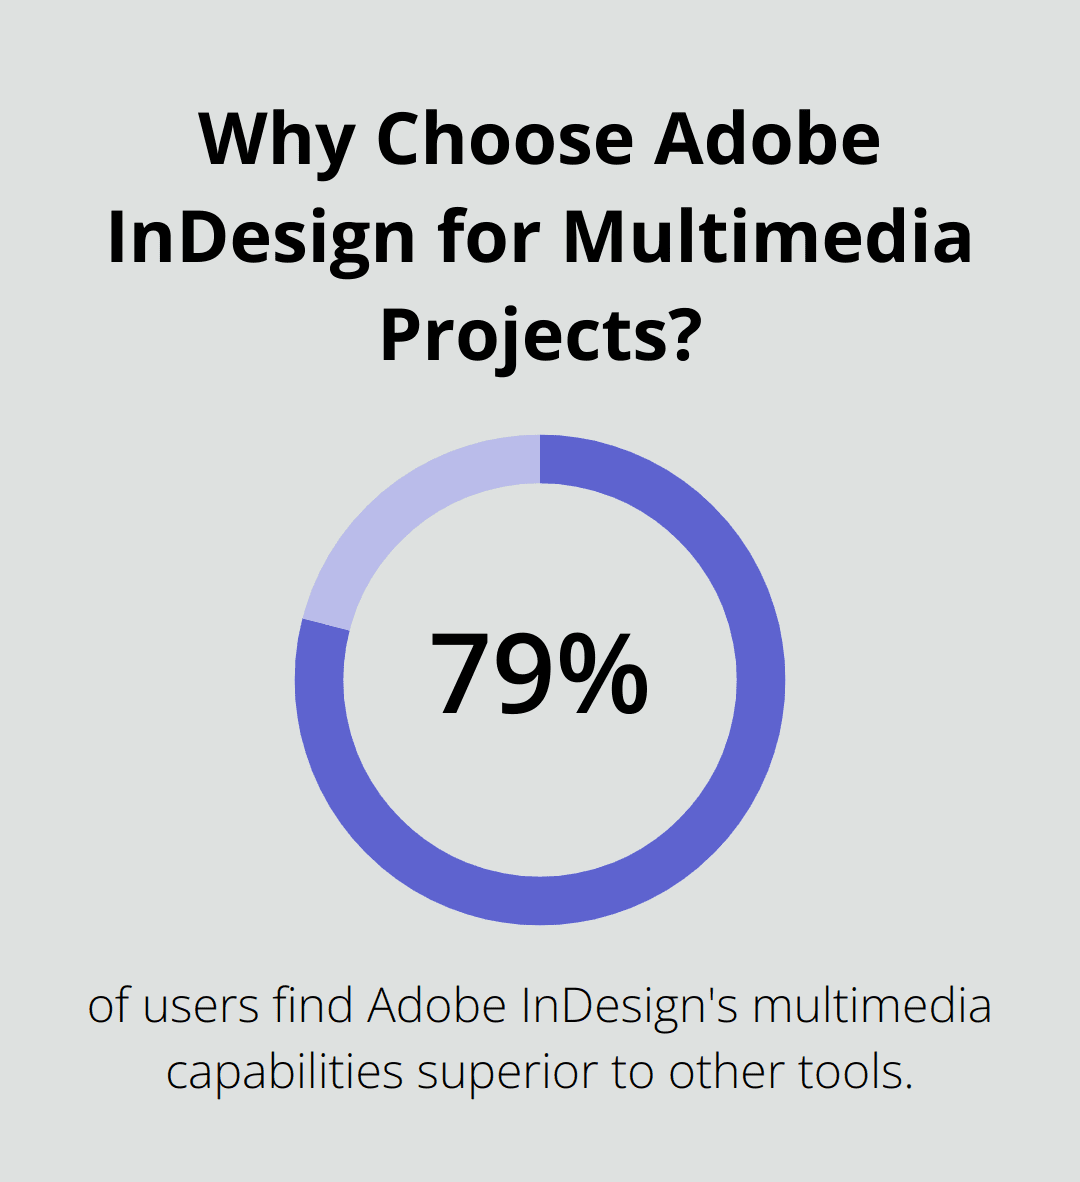 Why Choose Adobe InDesign for Multimedia Projects?